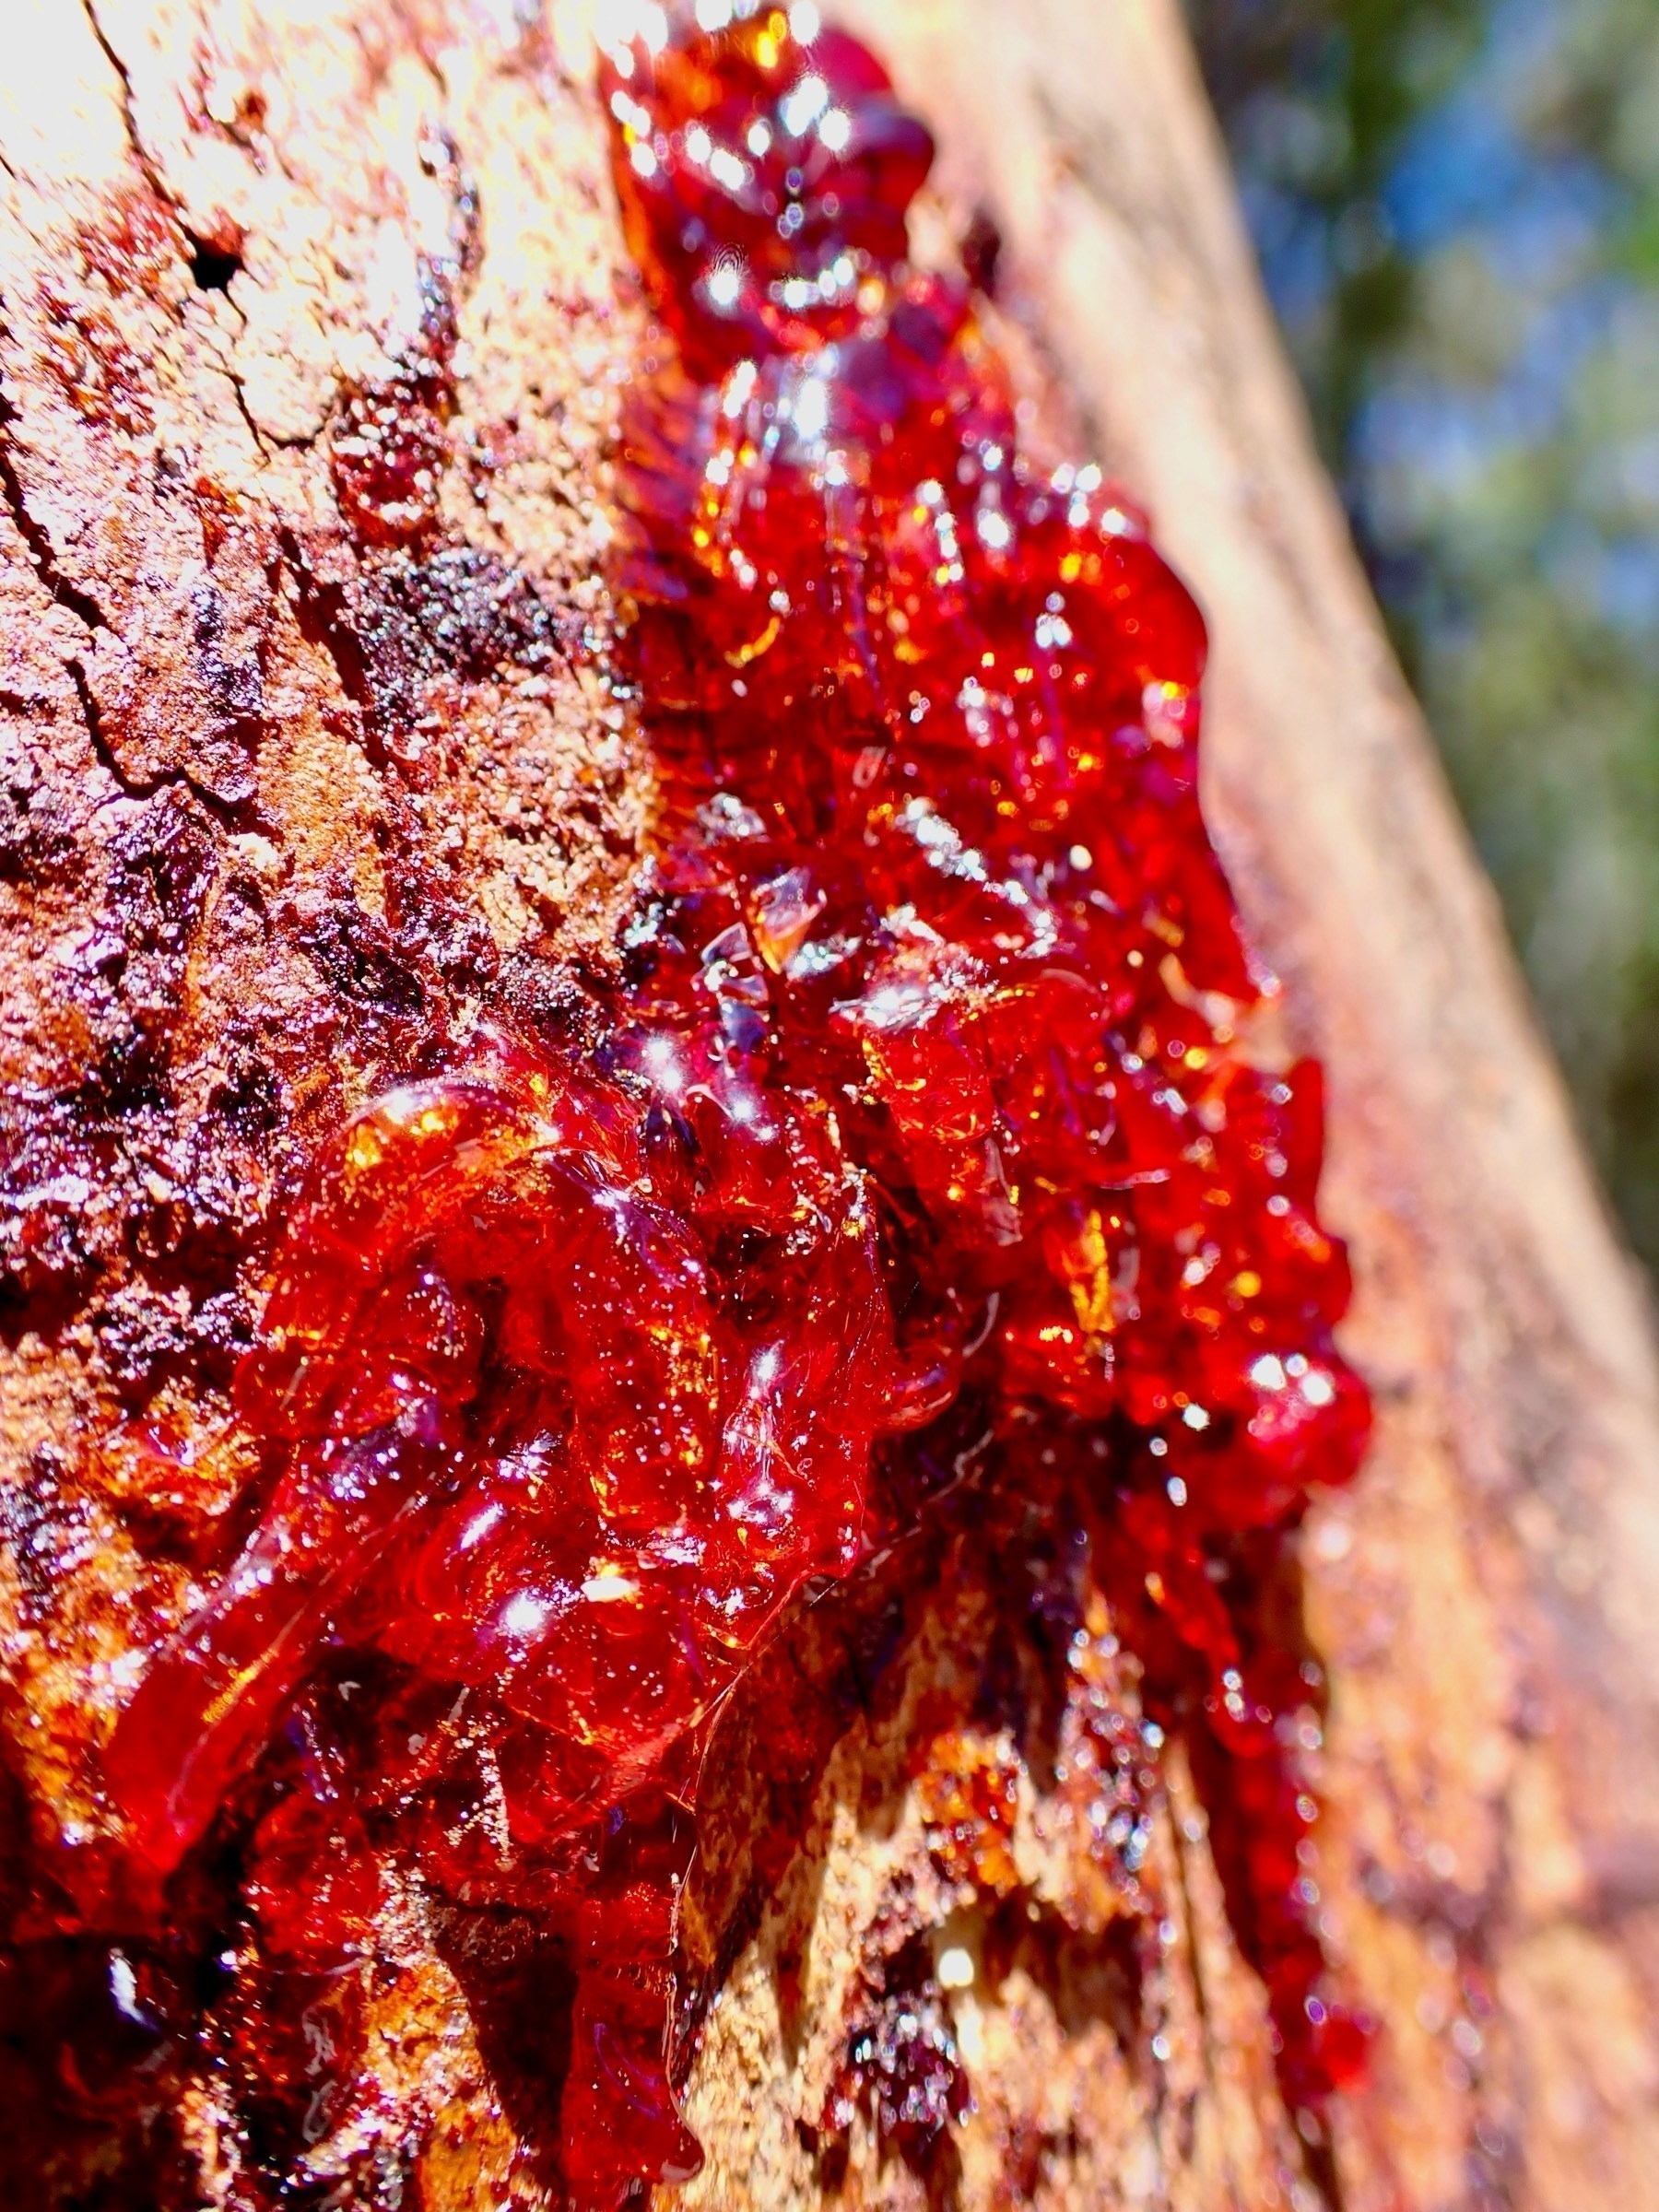 Oozing red tree sap in the sunshine